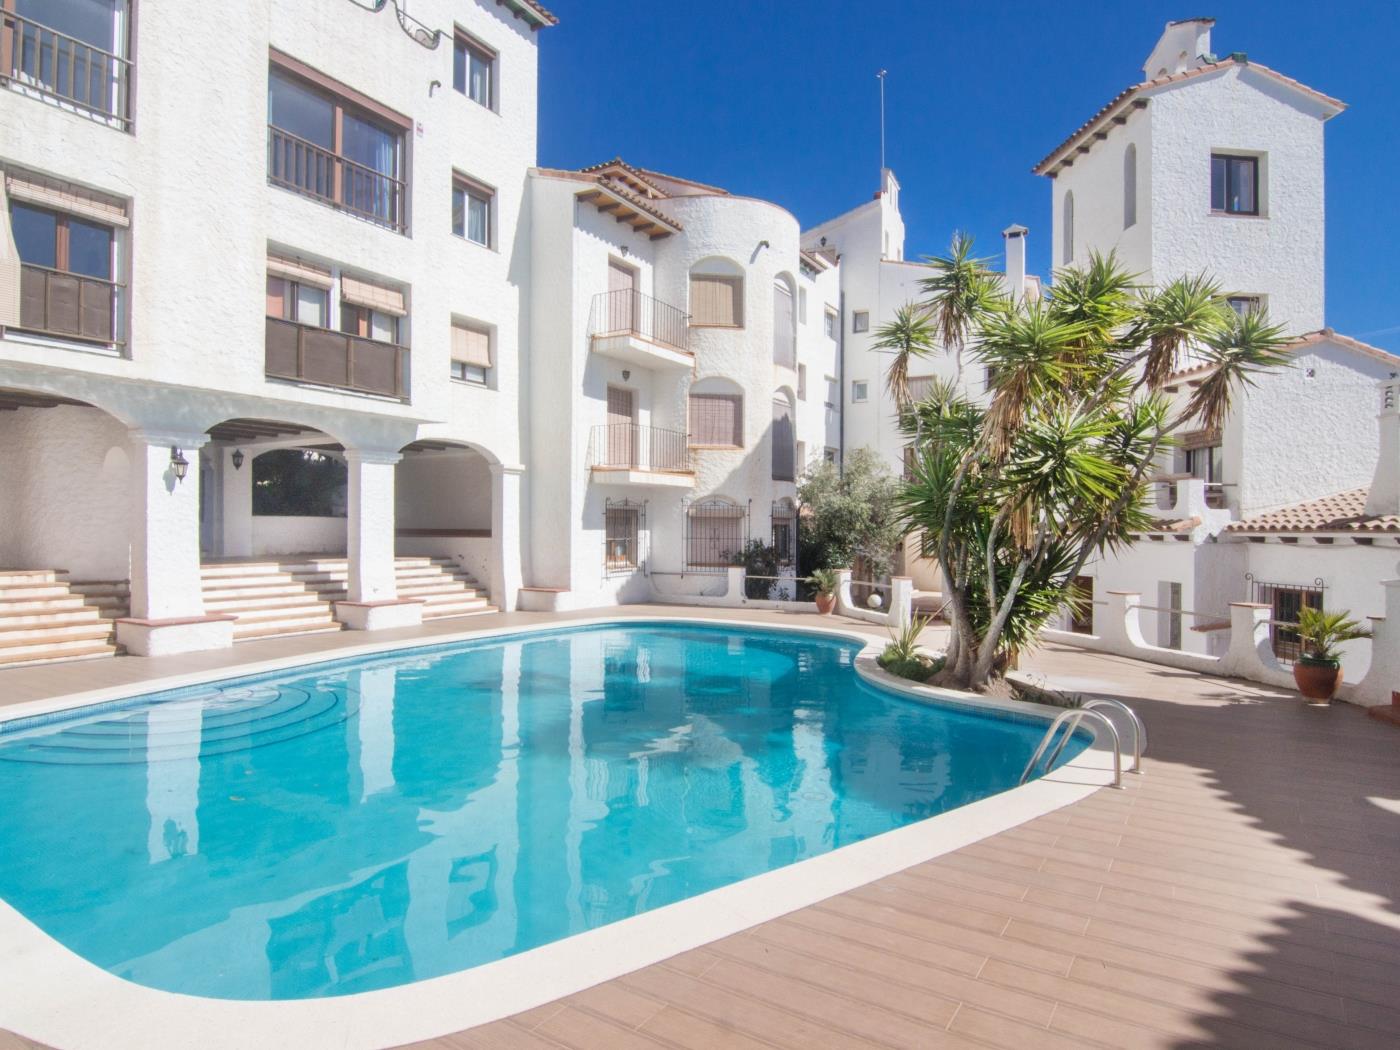 CAPRITX DE MAR BY BLAUSITGES Terrace, pool and wifi over the sea, beautiful view in SITGES